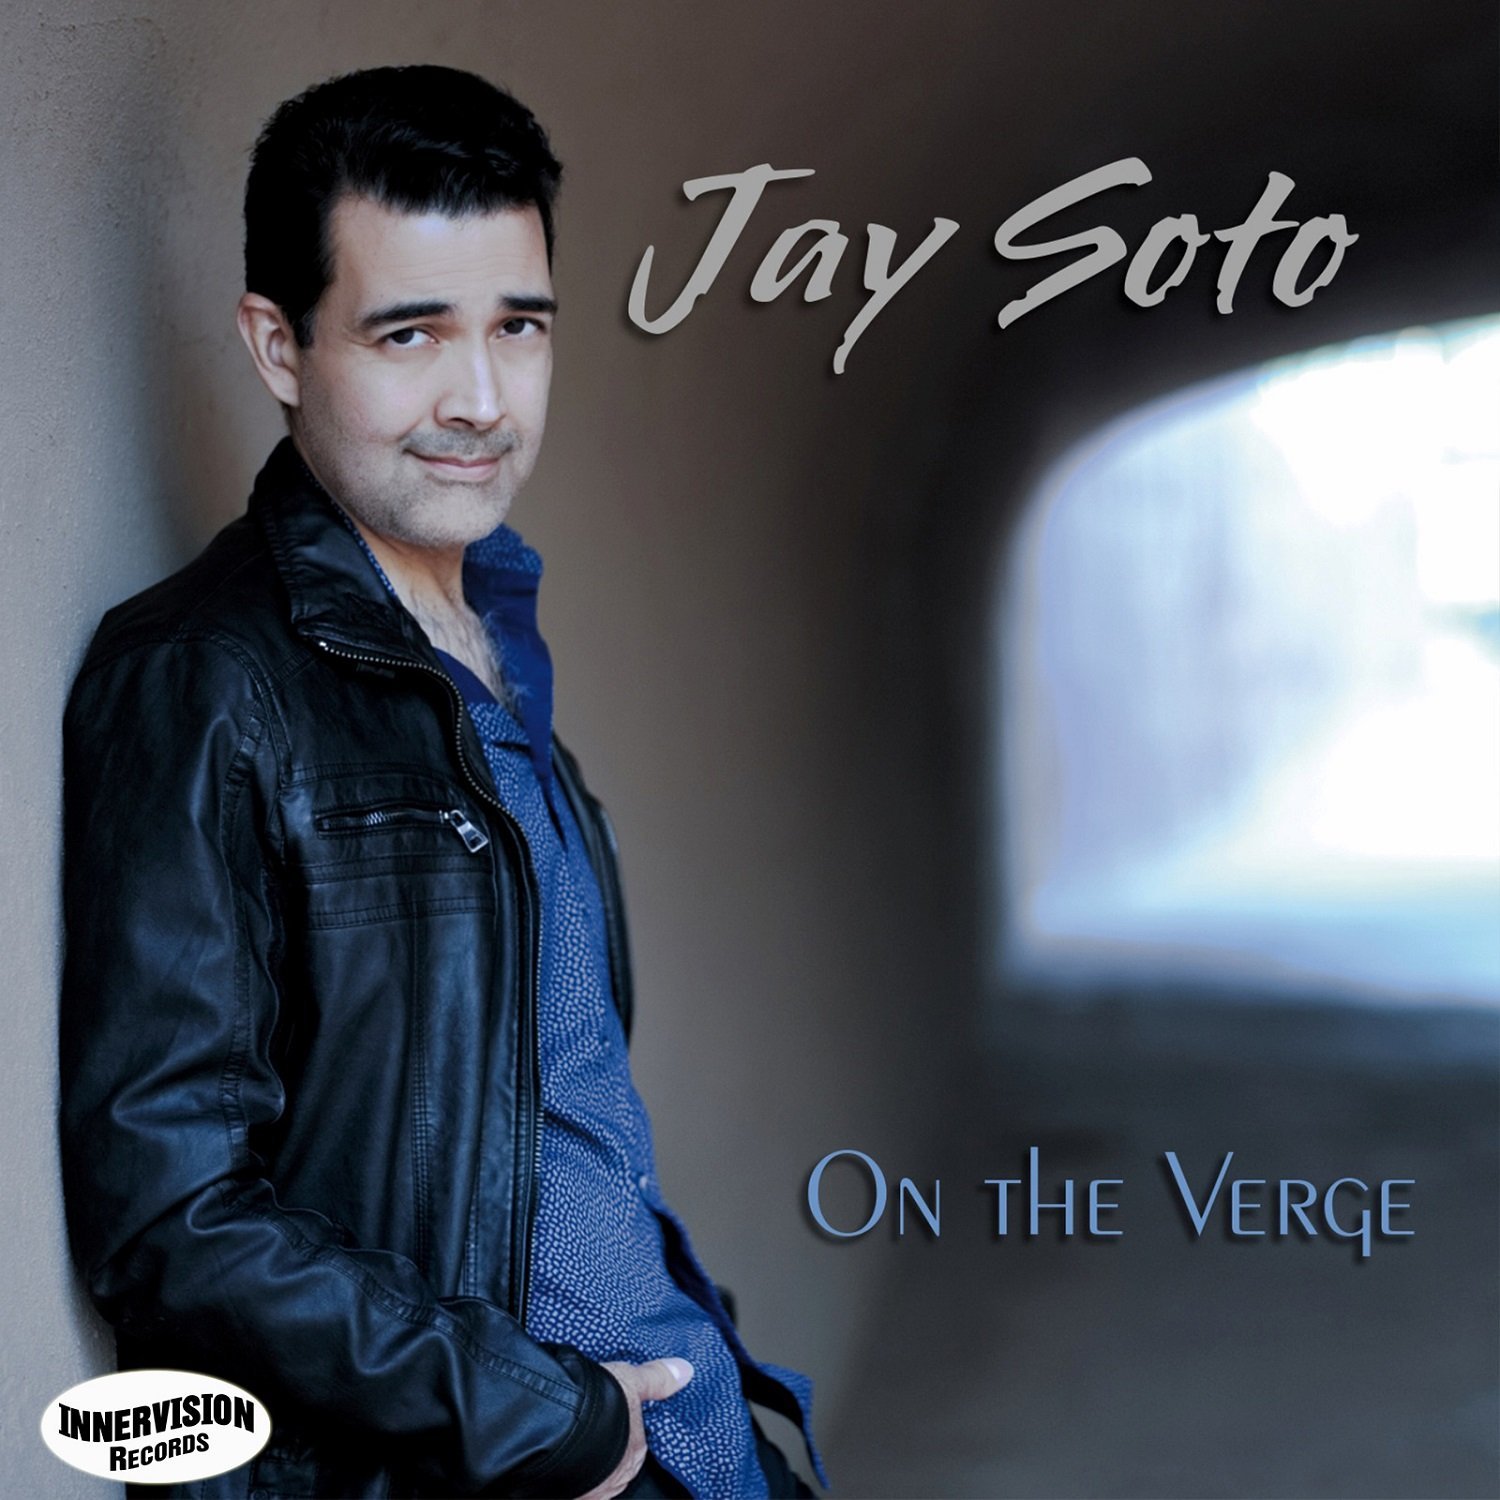 JAY SOTO - On the Verge cover 